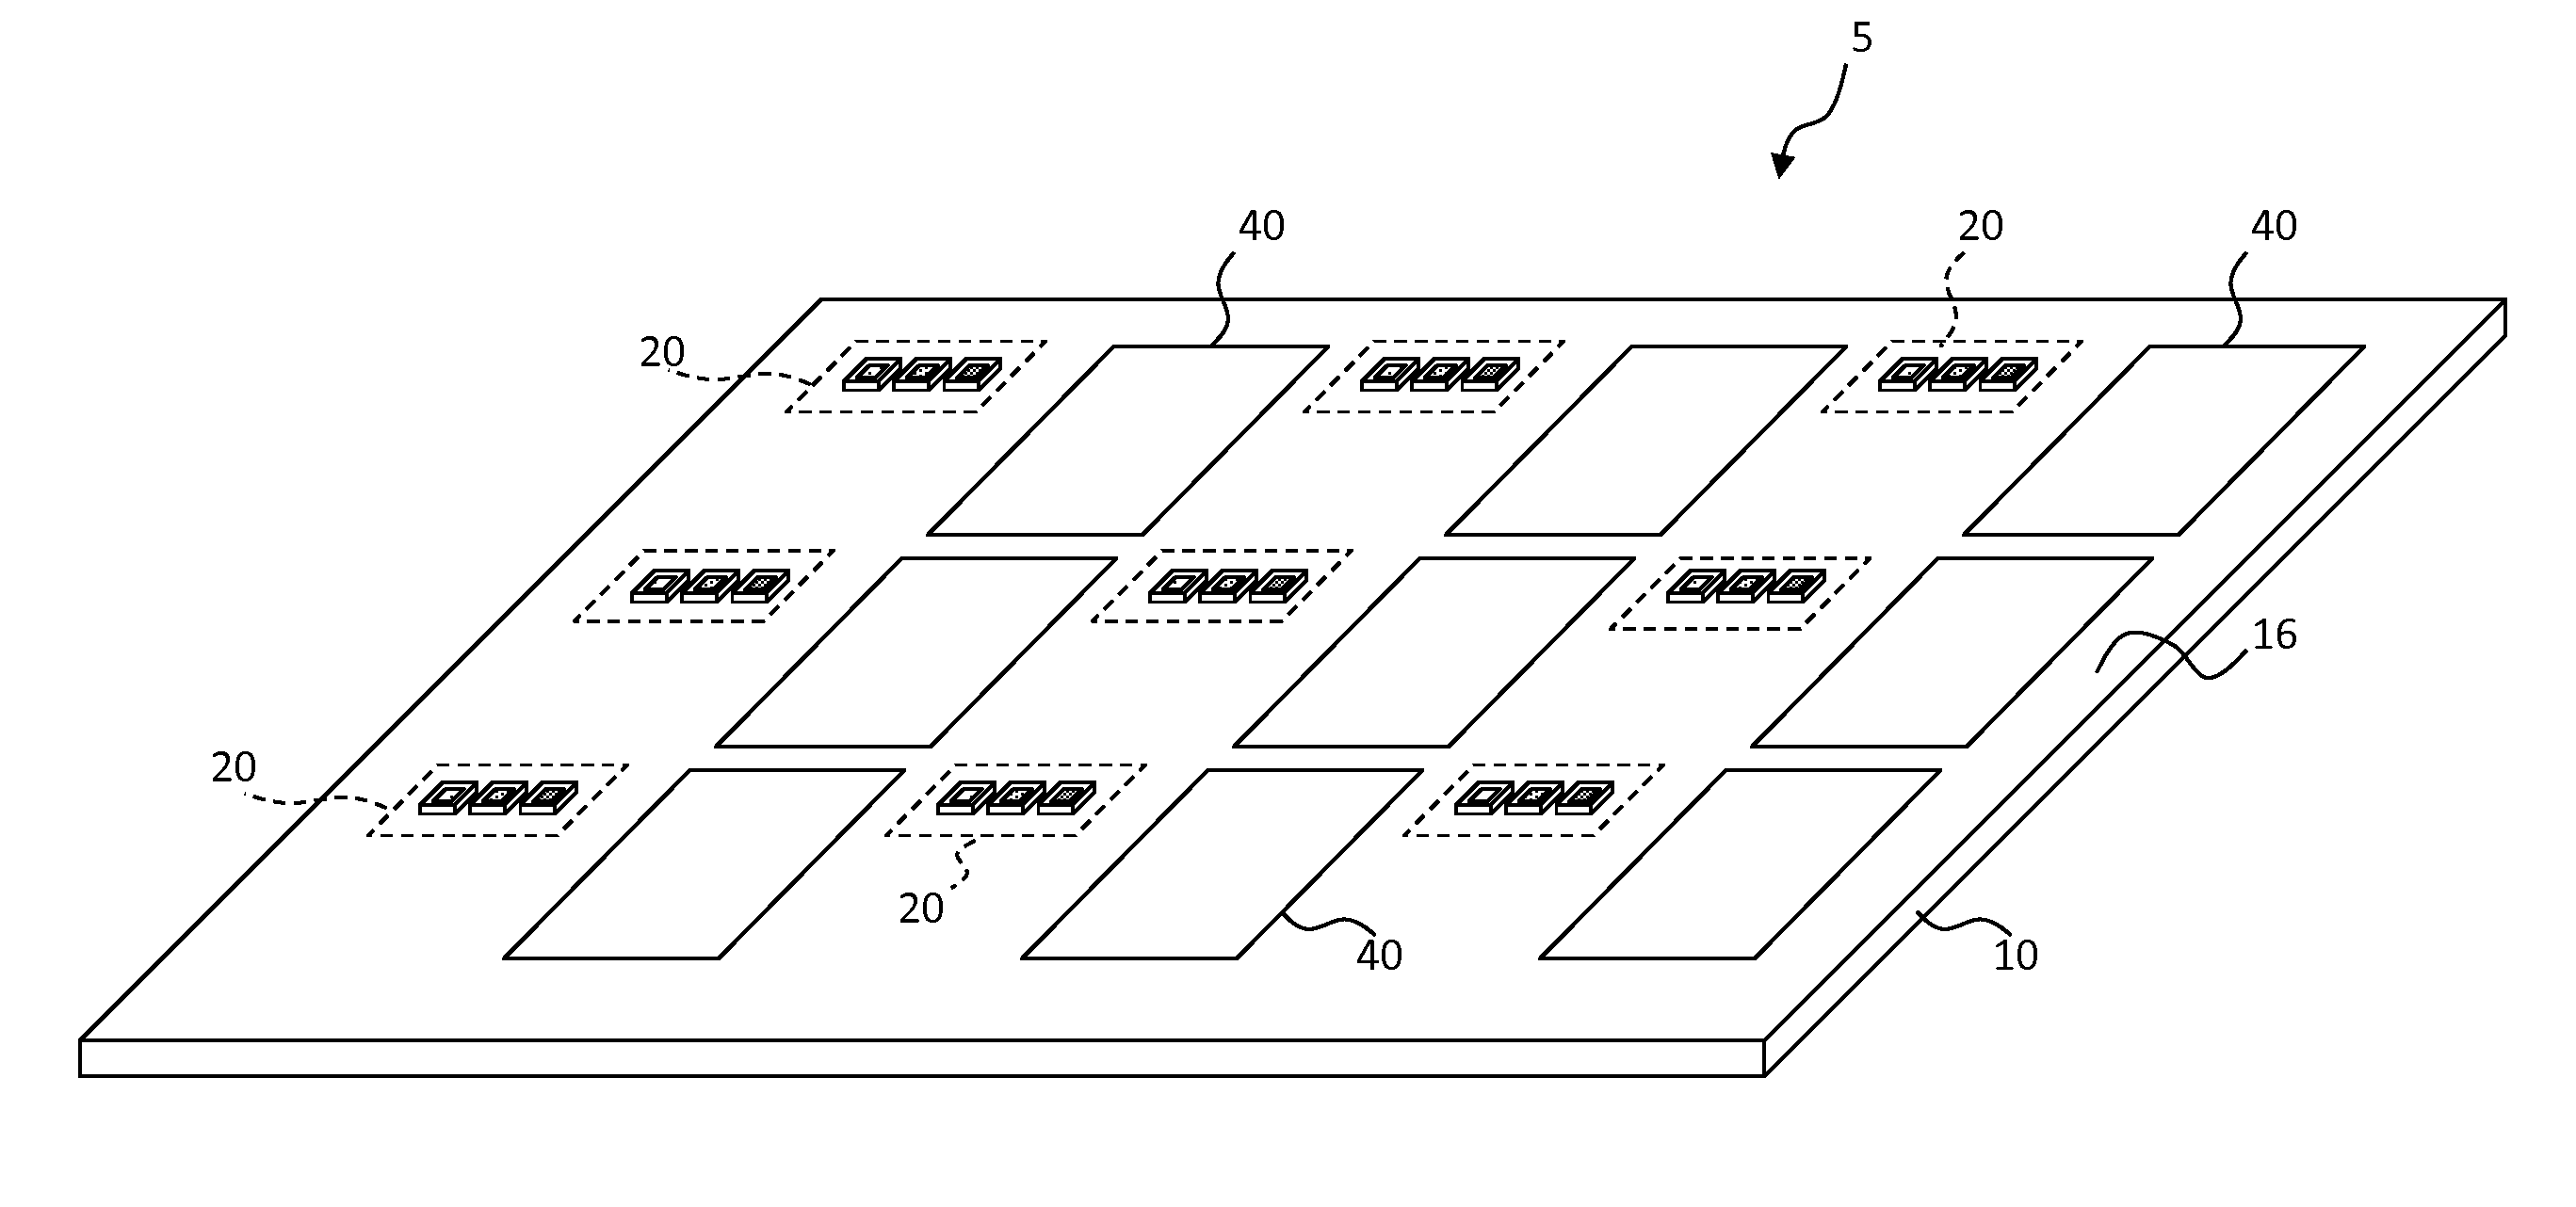 Small-aperture-ratio display with electrical component